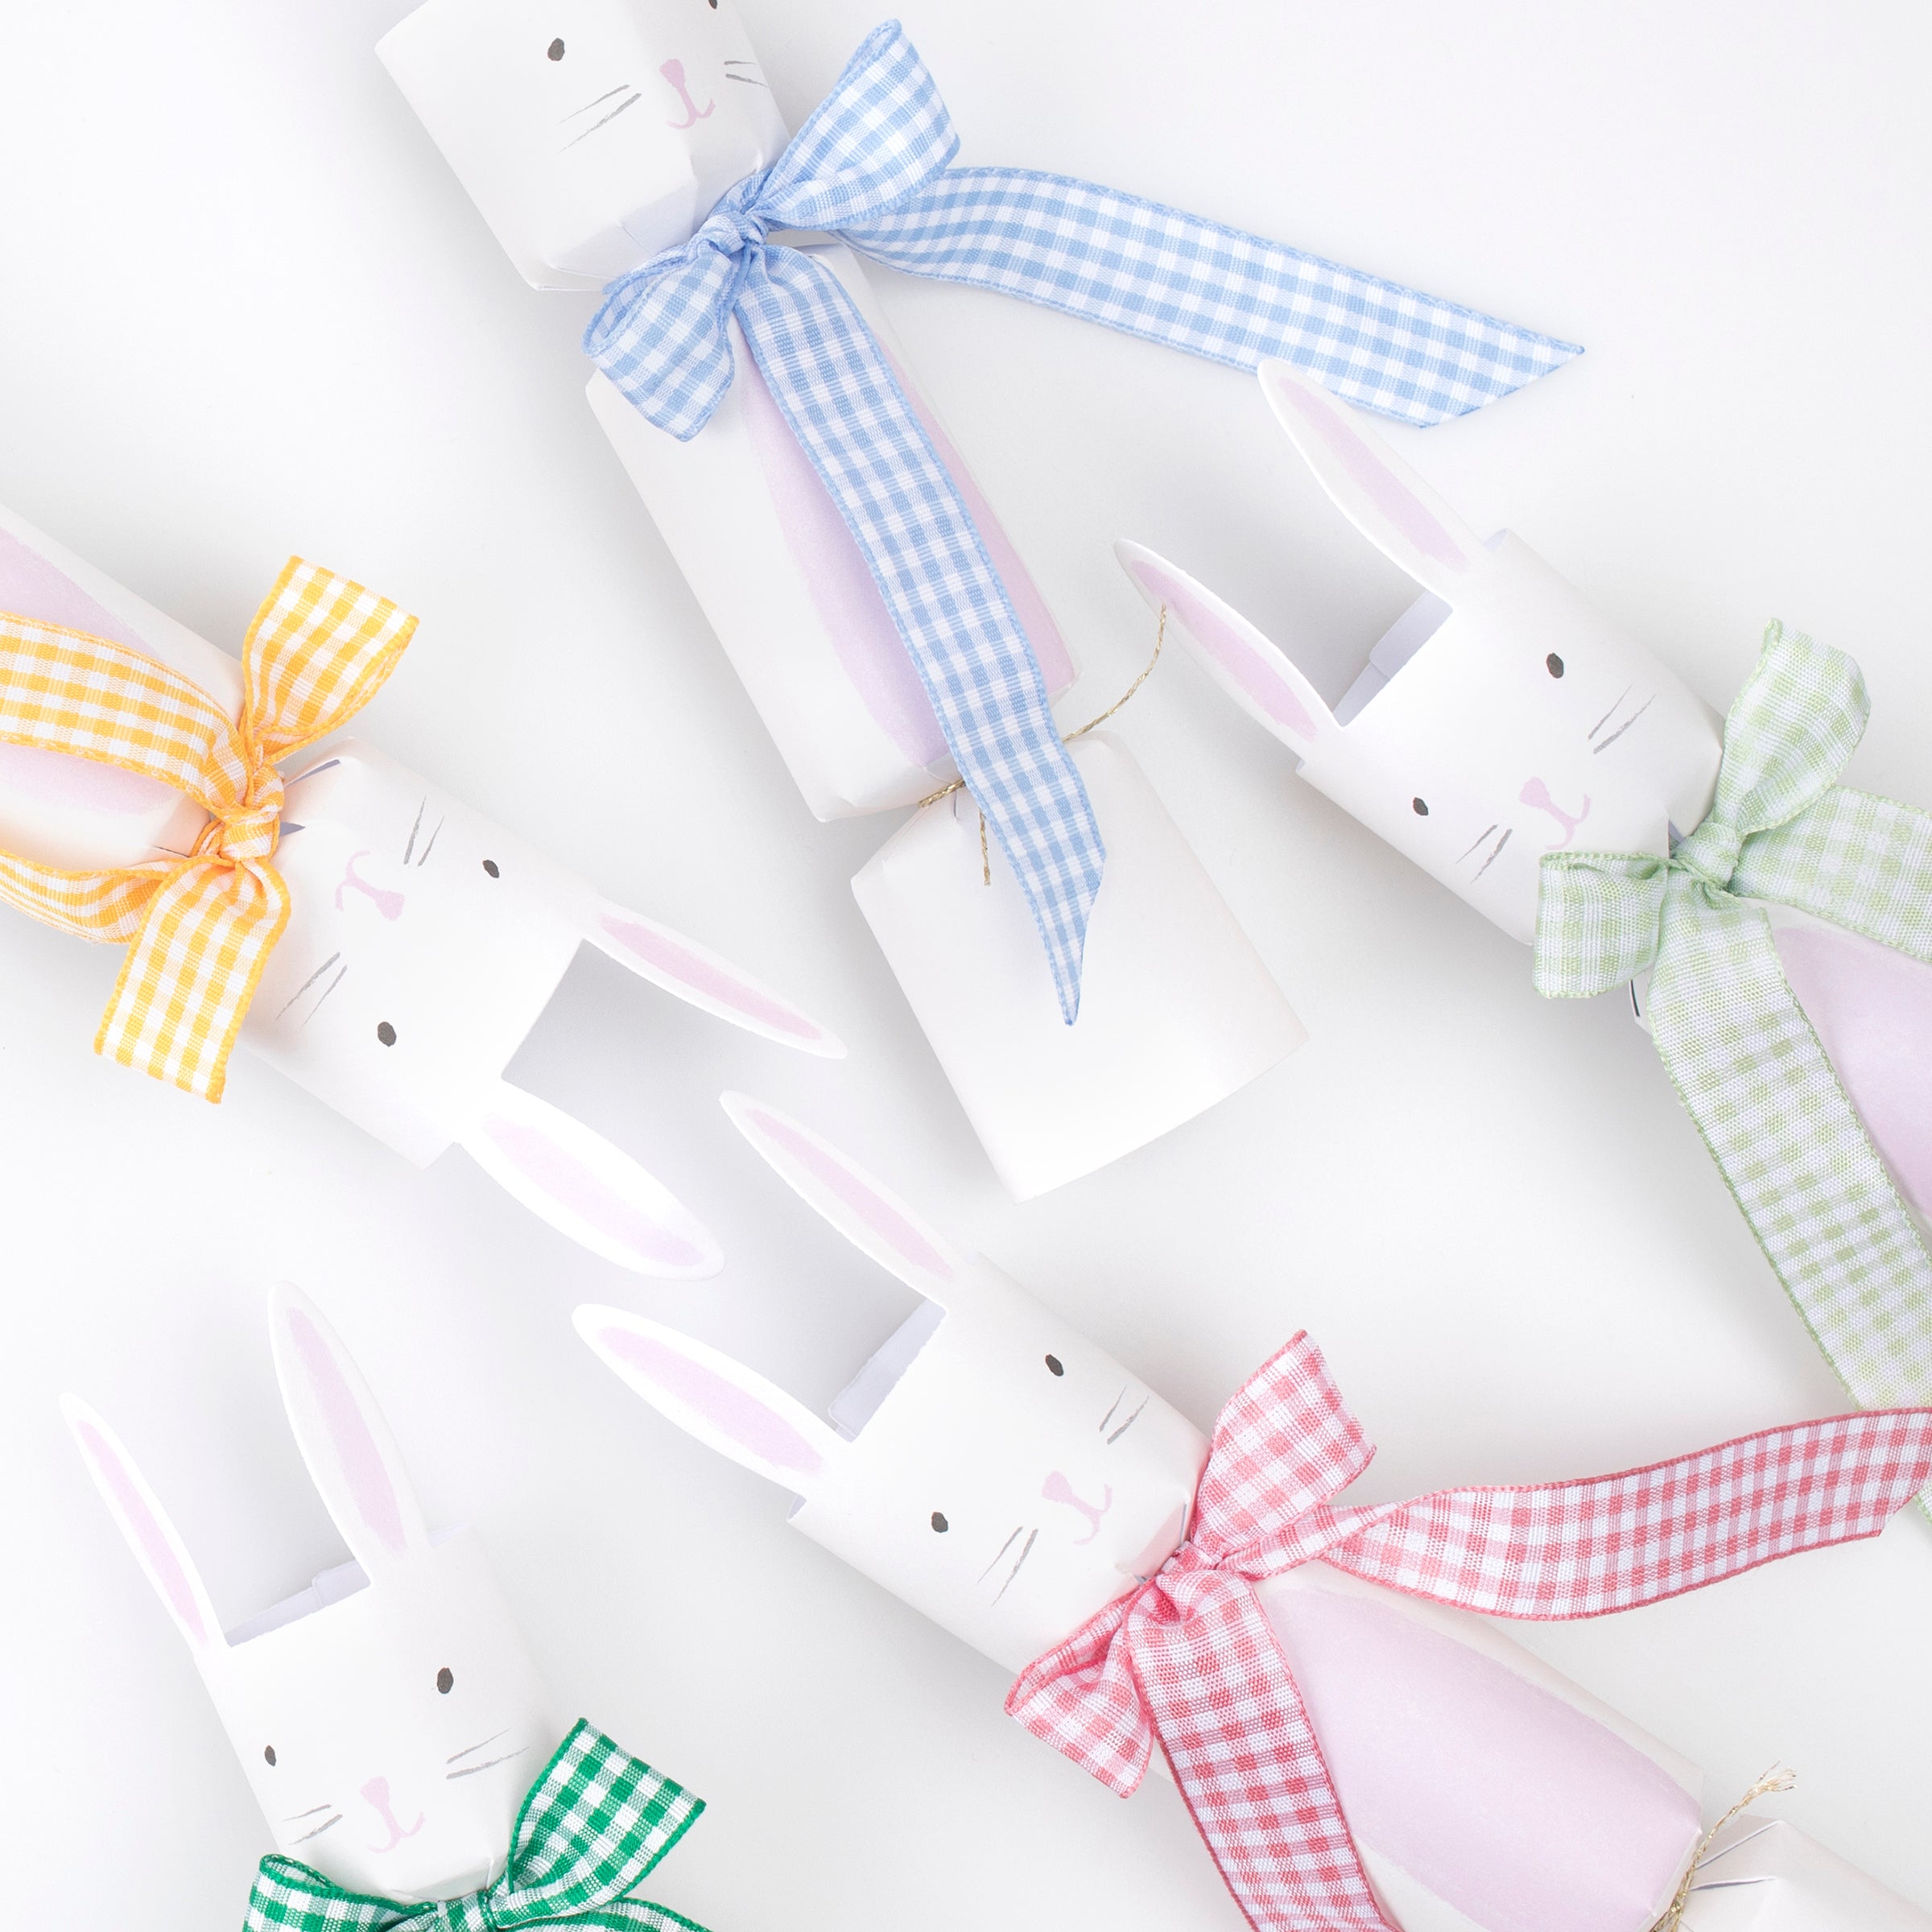 Our party crackers are crafted in the shape of bunnies, and contain mint tissue paper hats, erasers and a joke.